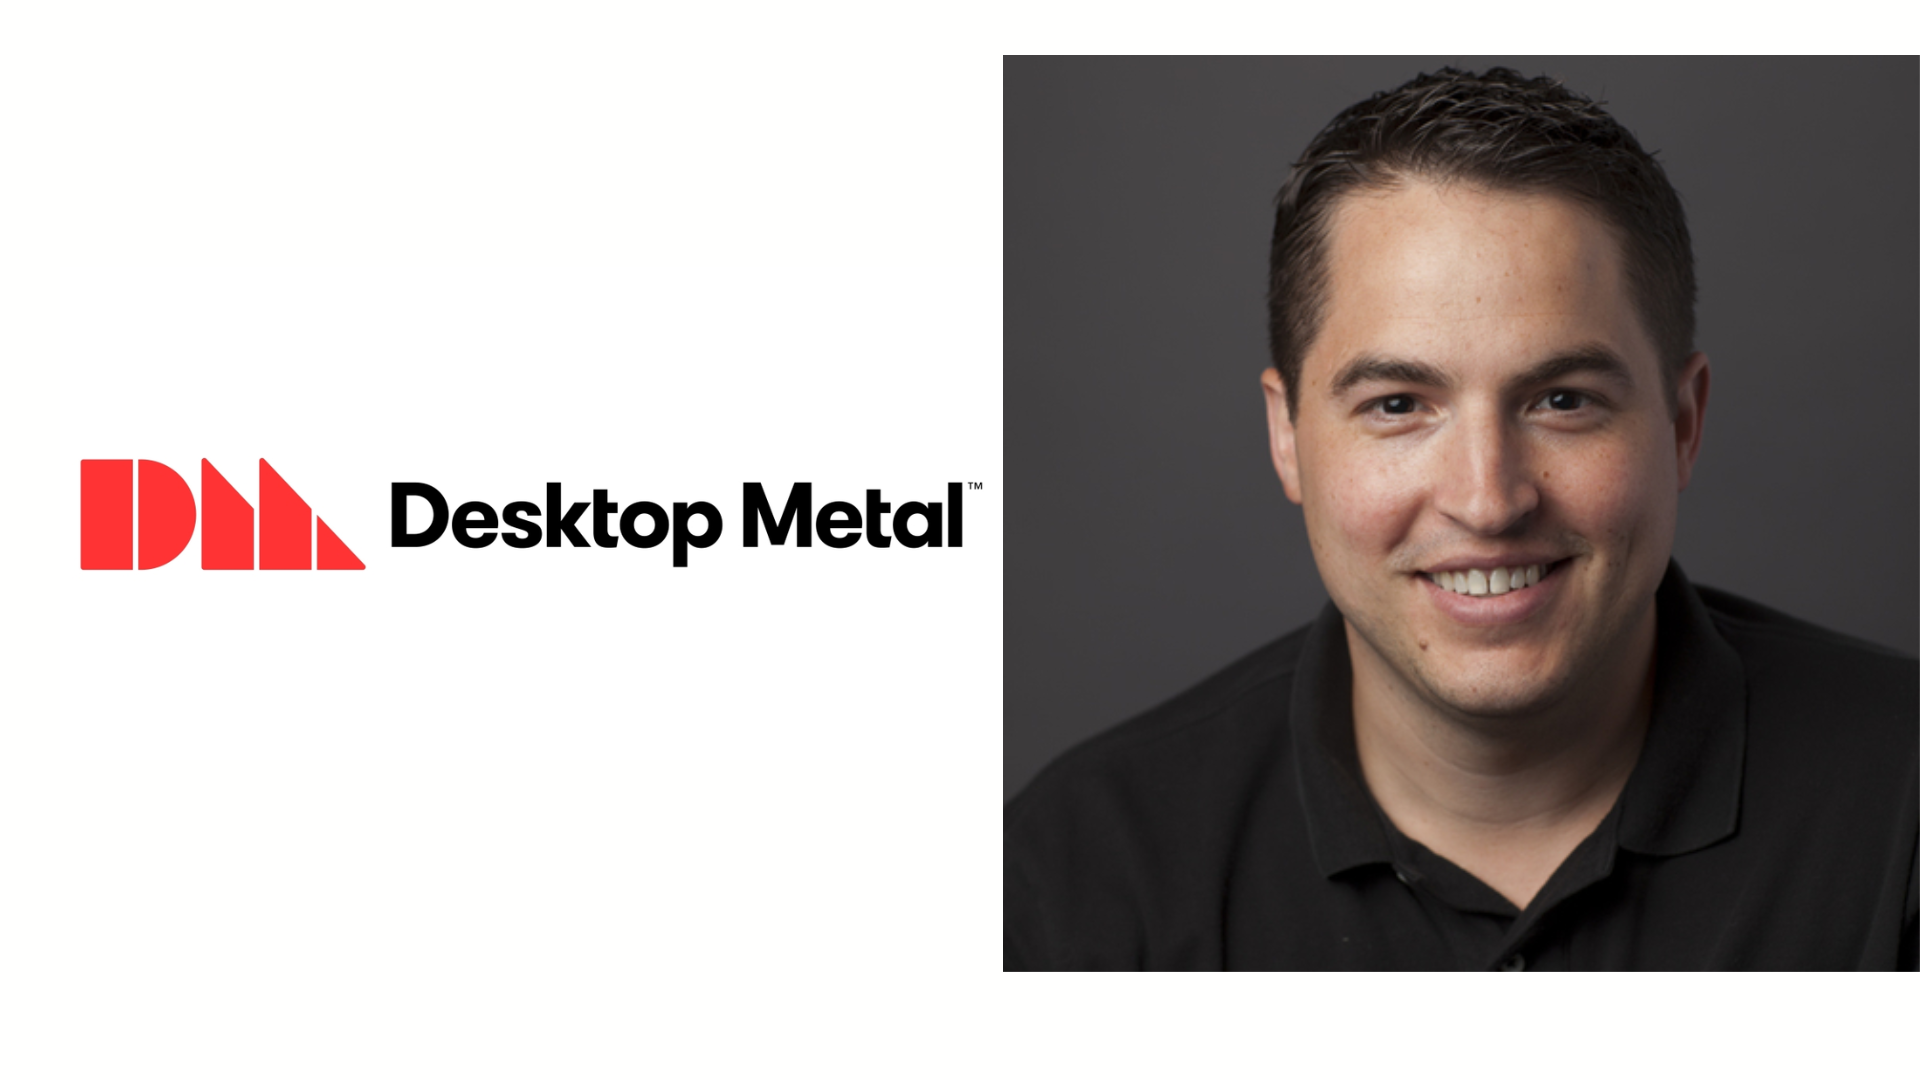 Desktop Metal, Inc. announced Jason Cole will join the Company as Chief Financial Officer, effective November 10.